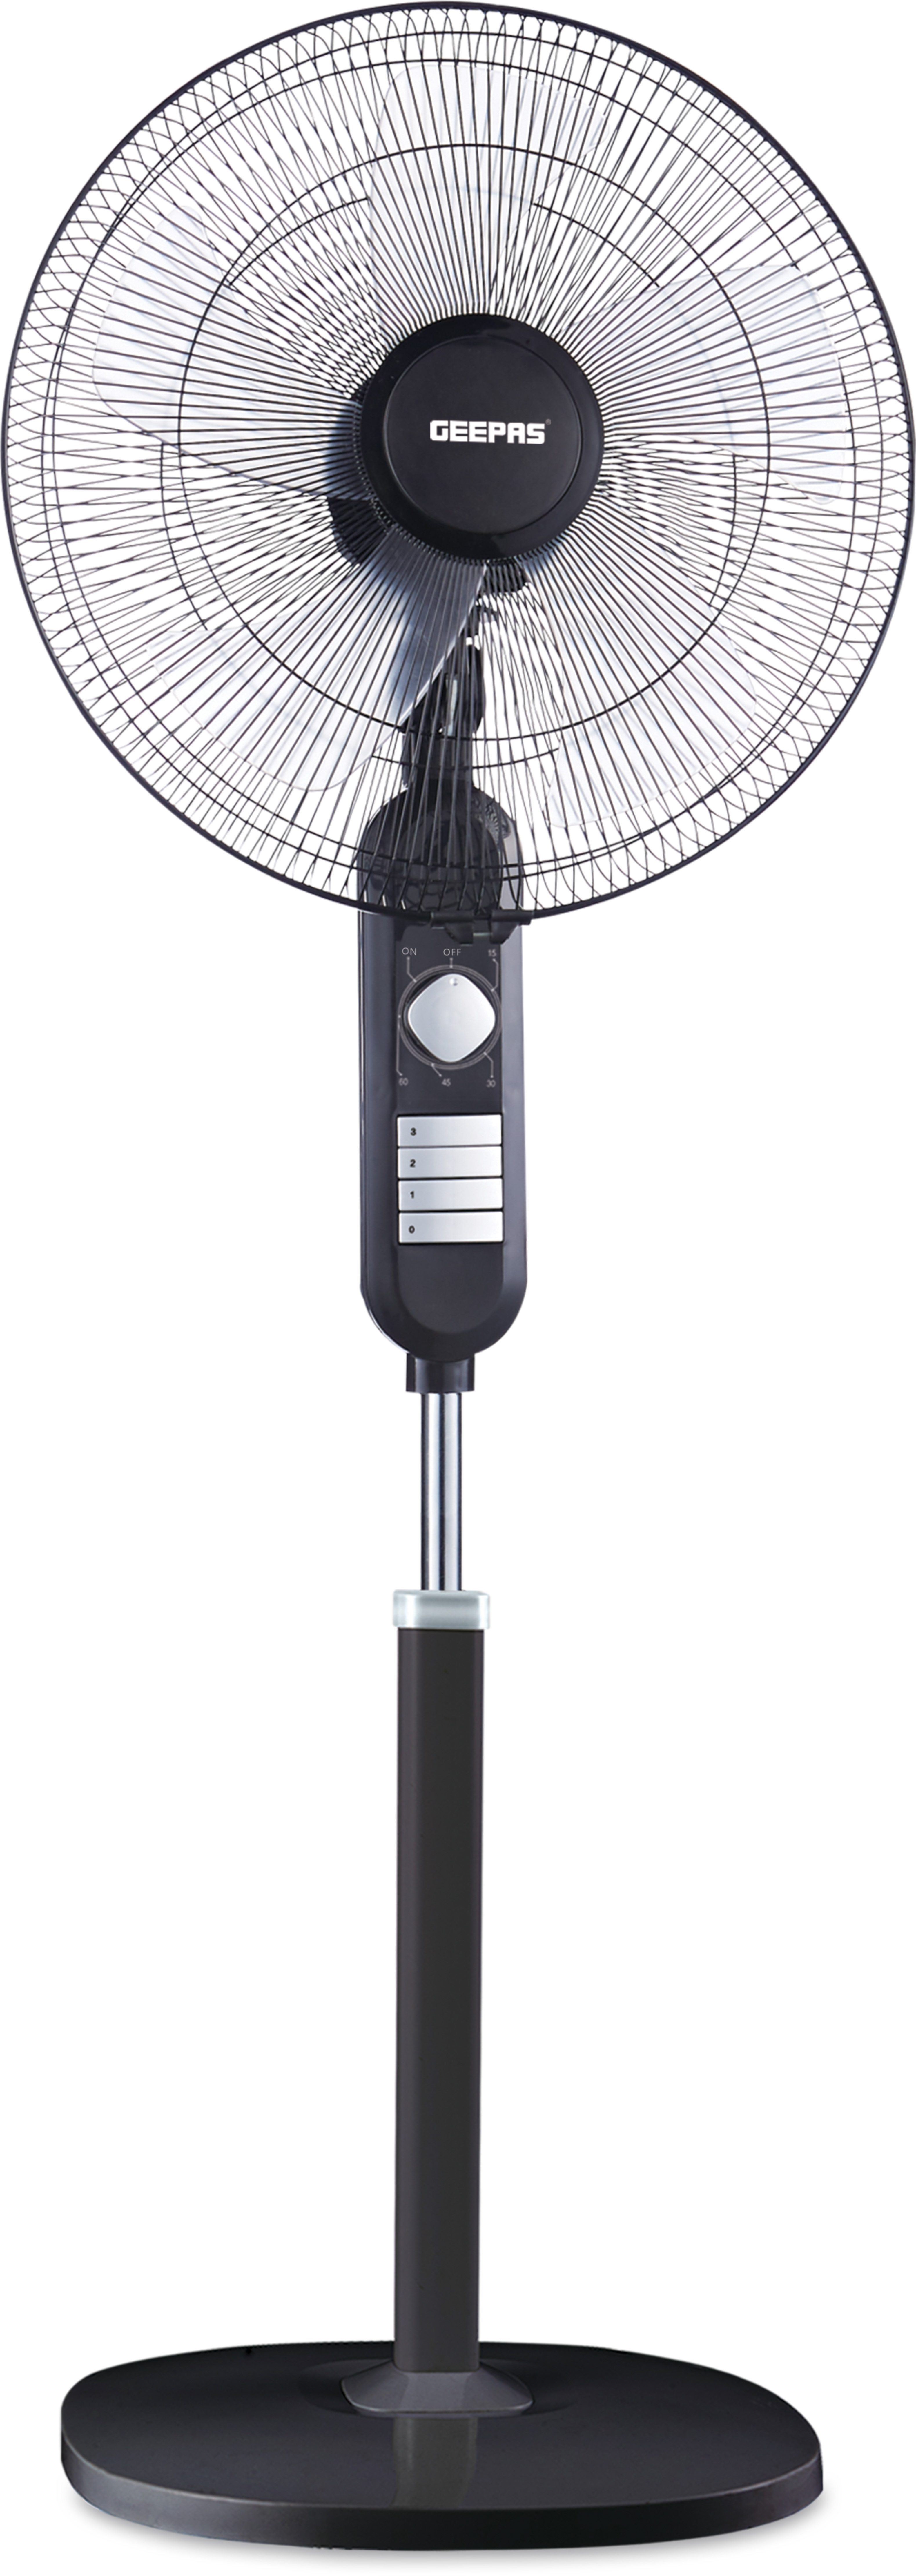 Geepas Gf9605 18-Inch 3 Speed Stand Fan - Piano Switch 3 Speed, 5 Leaf Blade, Adjustable Height &amp; Tilt Setting With Overheat Protection | Wide Oscillation (Black)